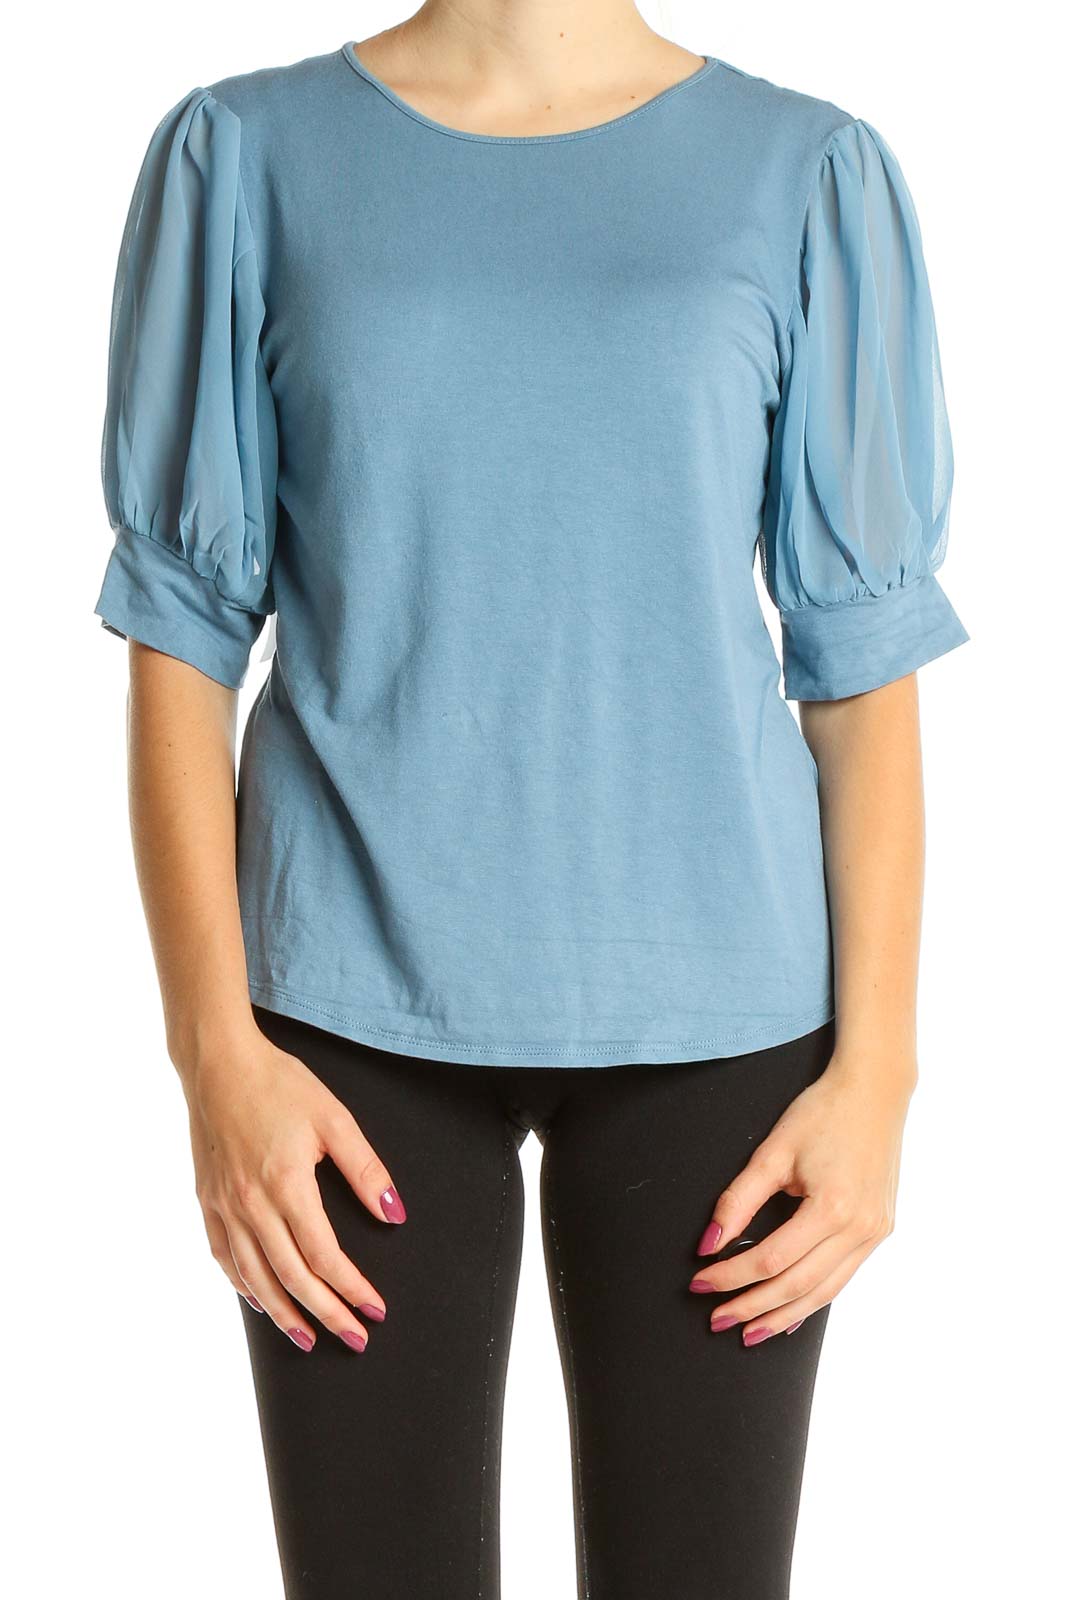 Blue Chic Top Front